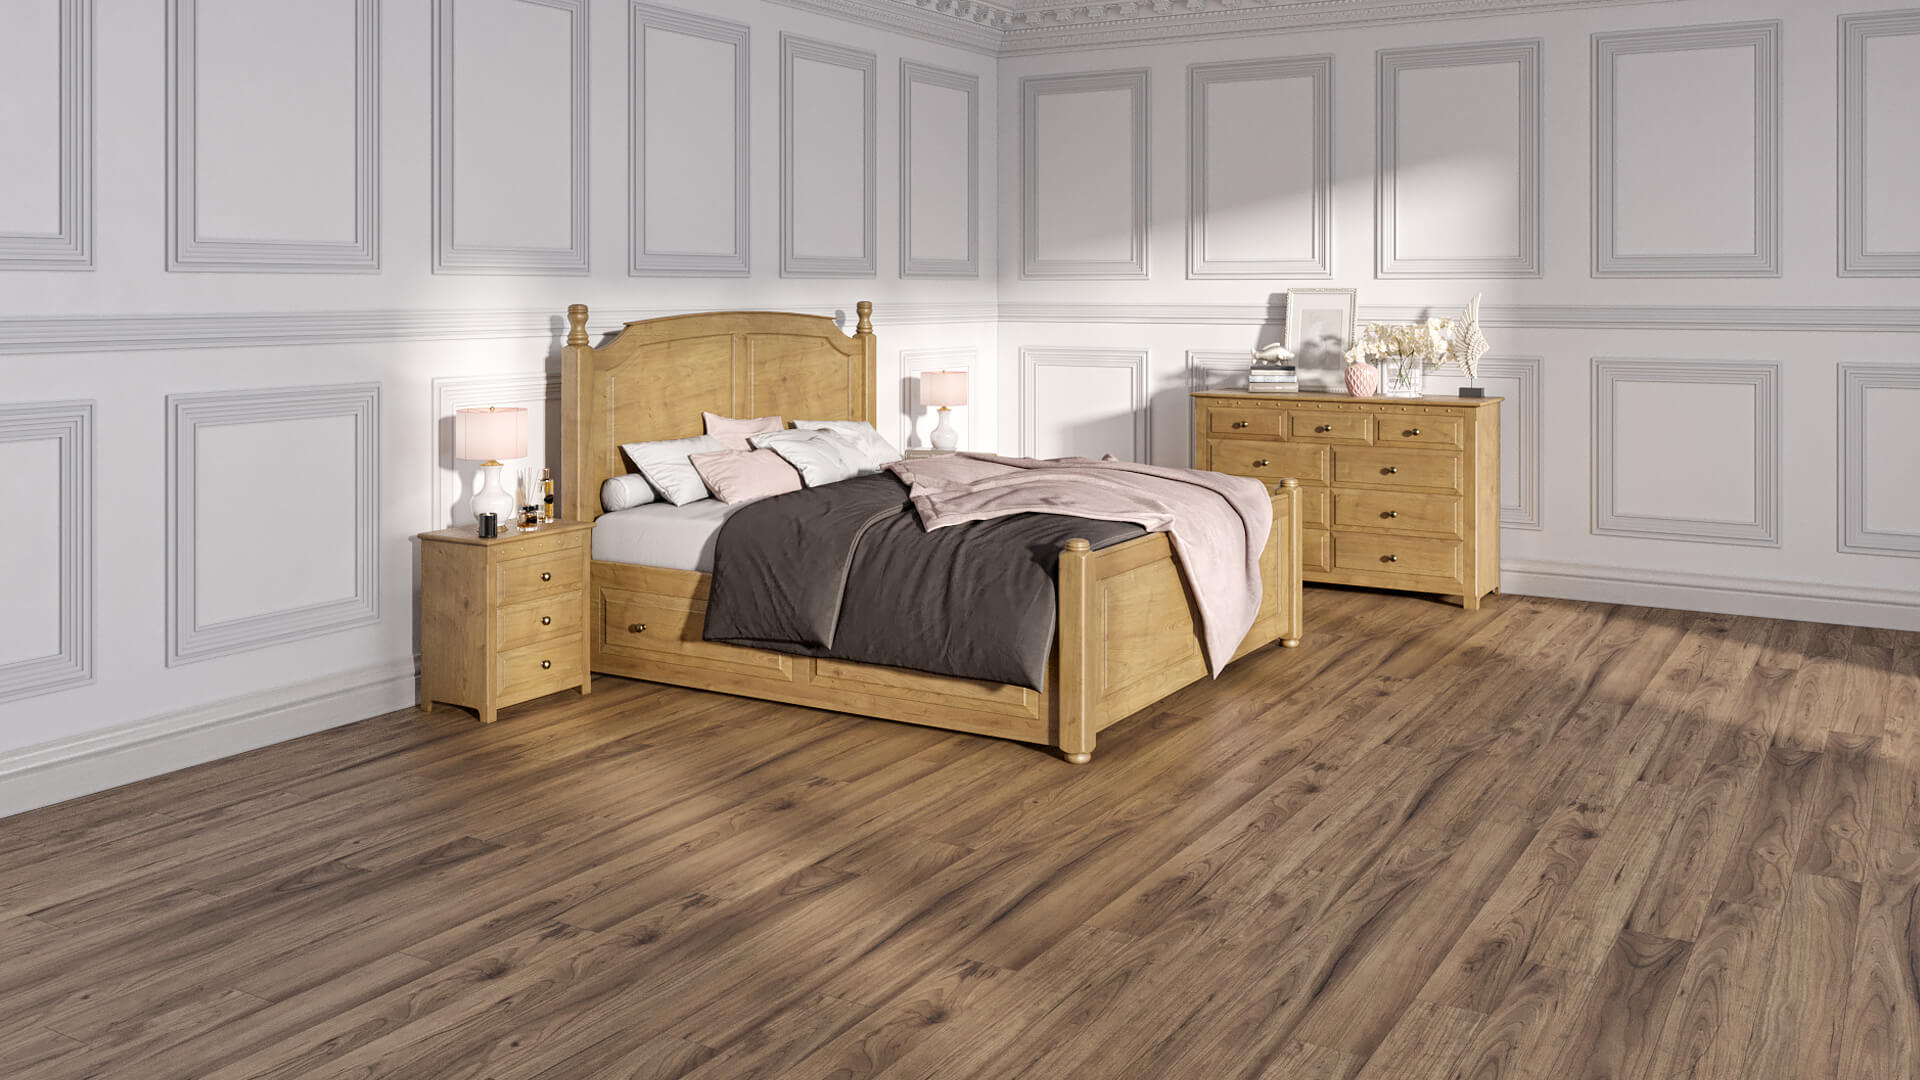 Photorealistic Wooden Bed Product Lifestyle CGI